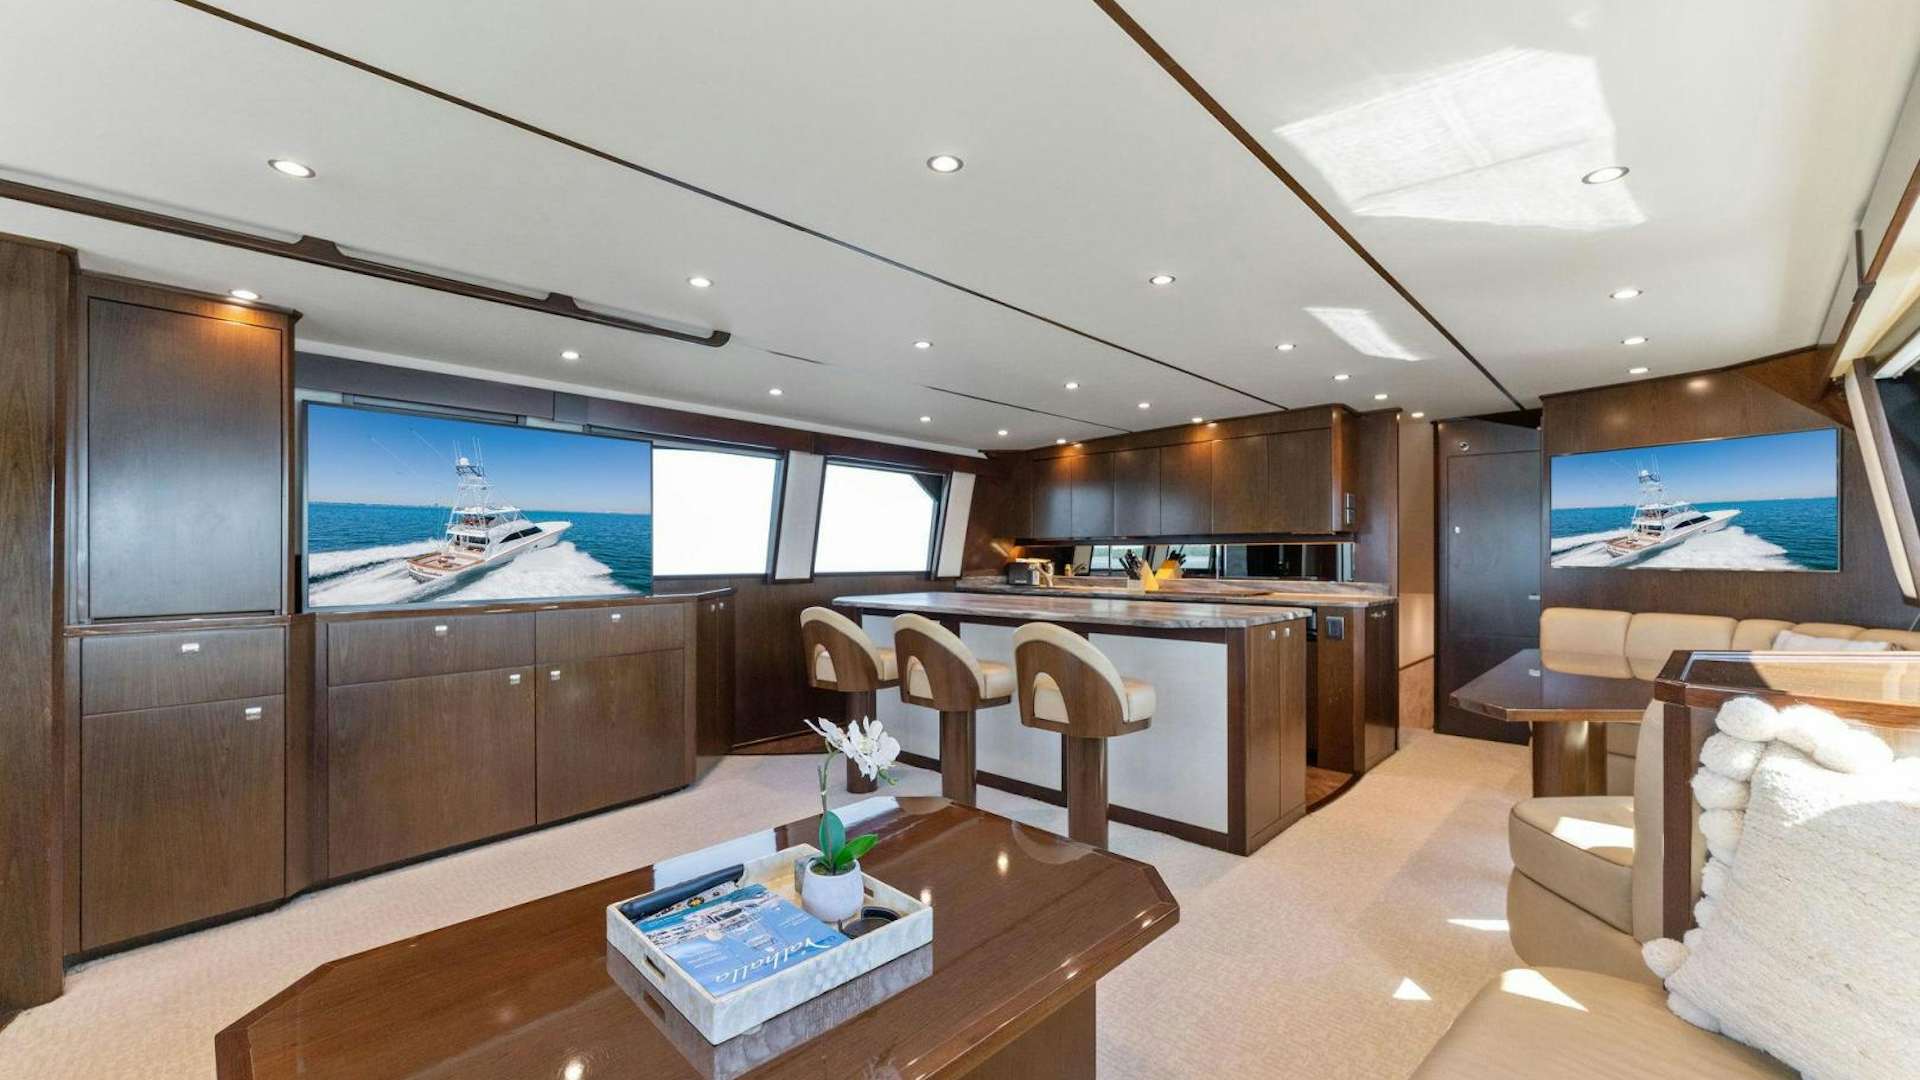 The provider
Yacht for Sale